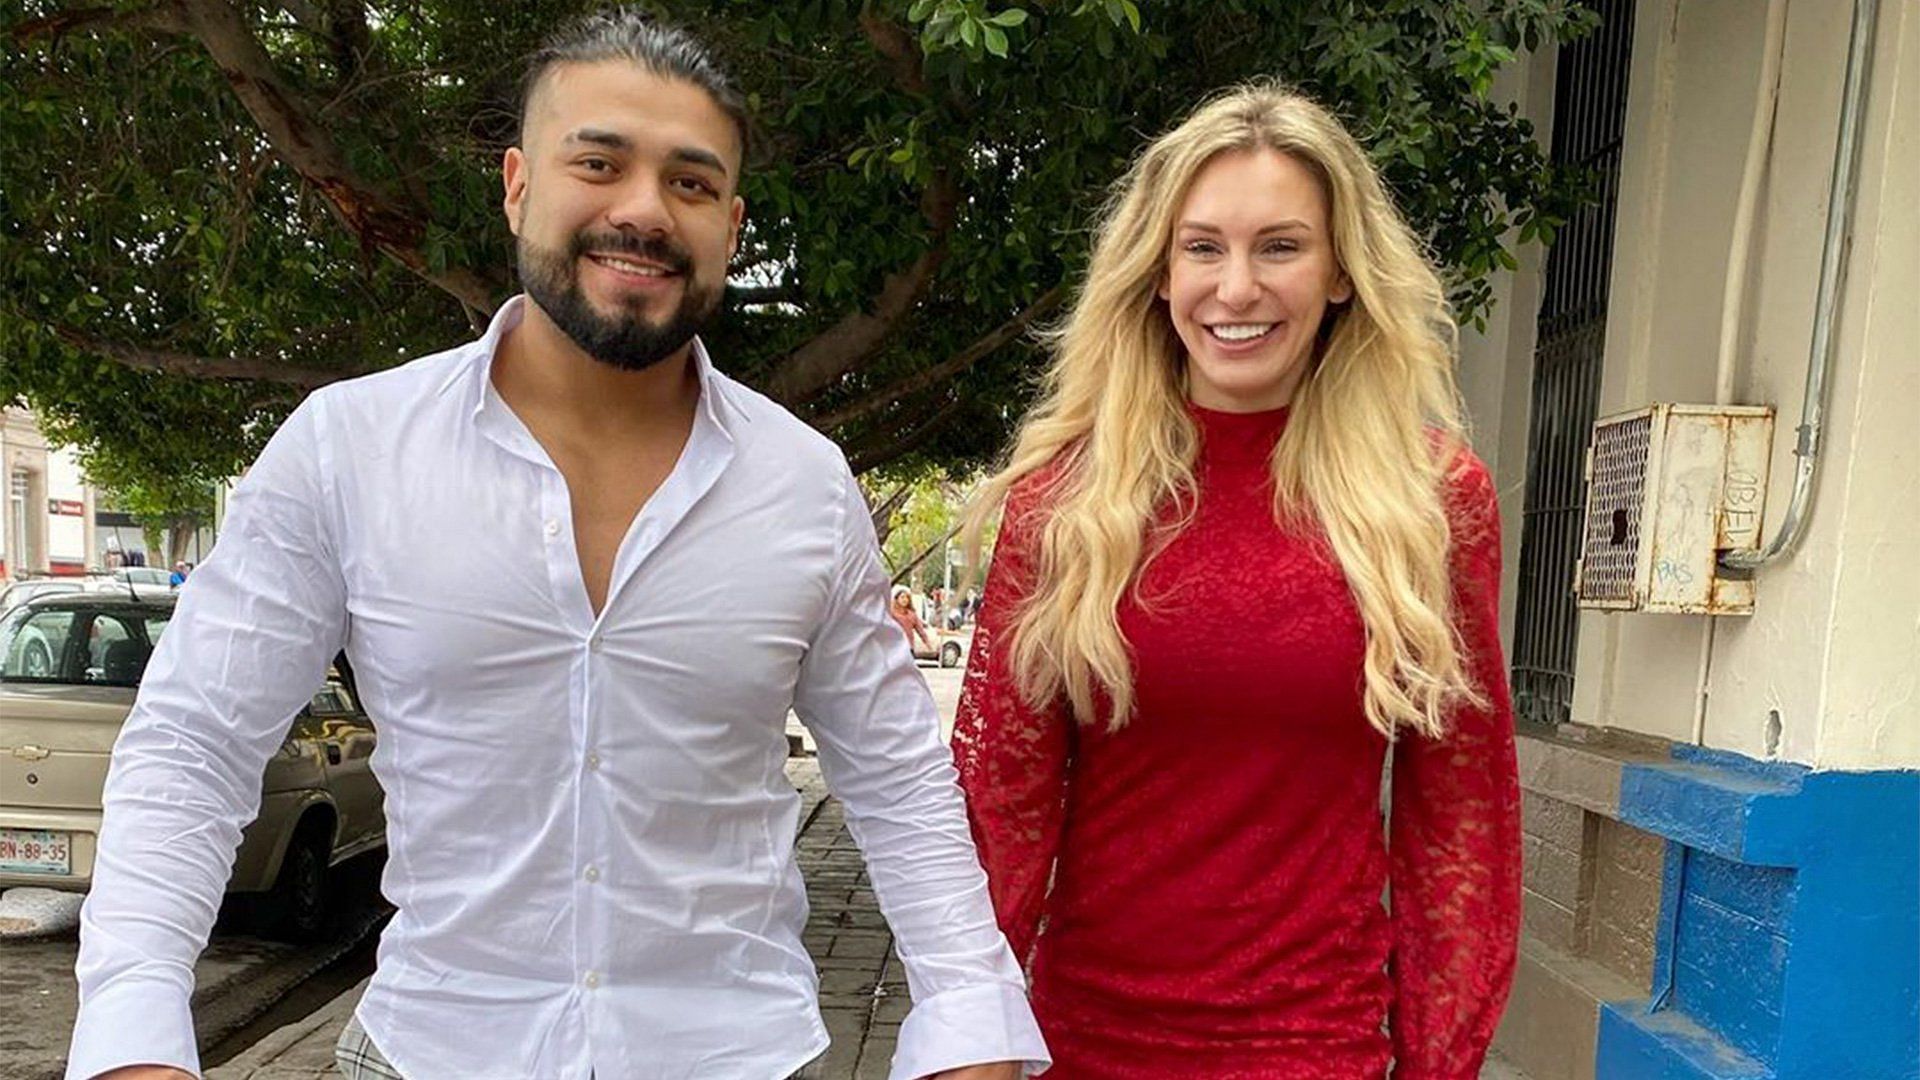 Andrade and his wife Charlotte Flair